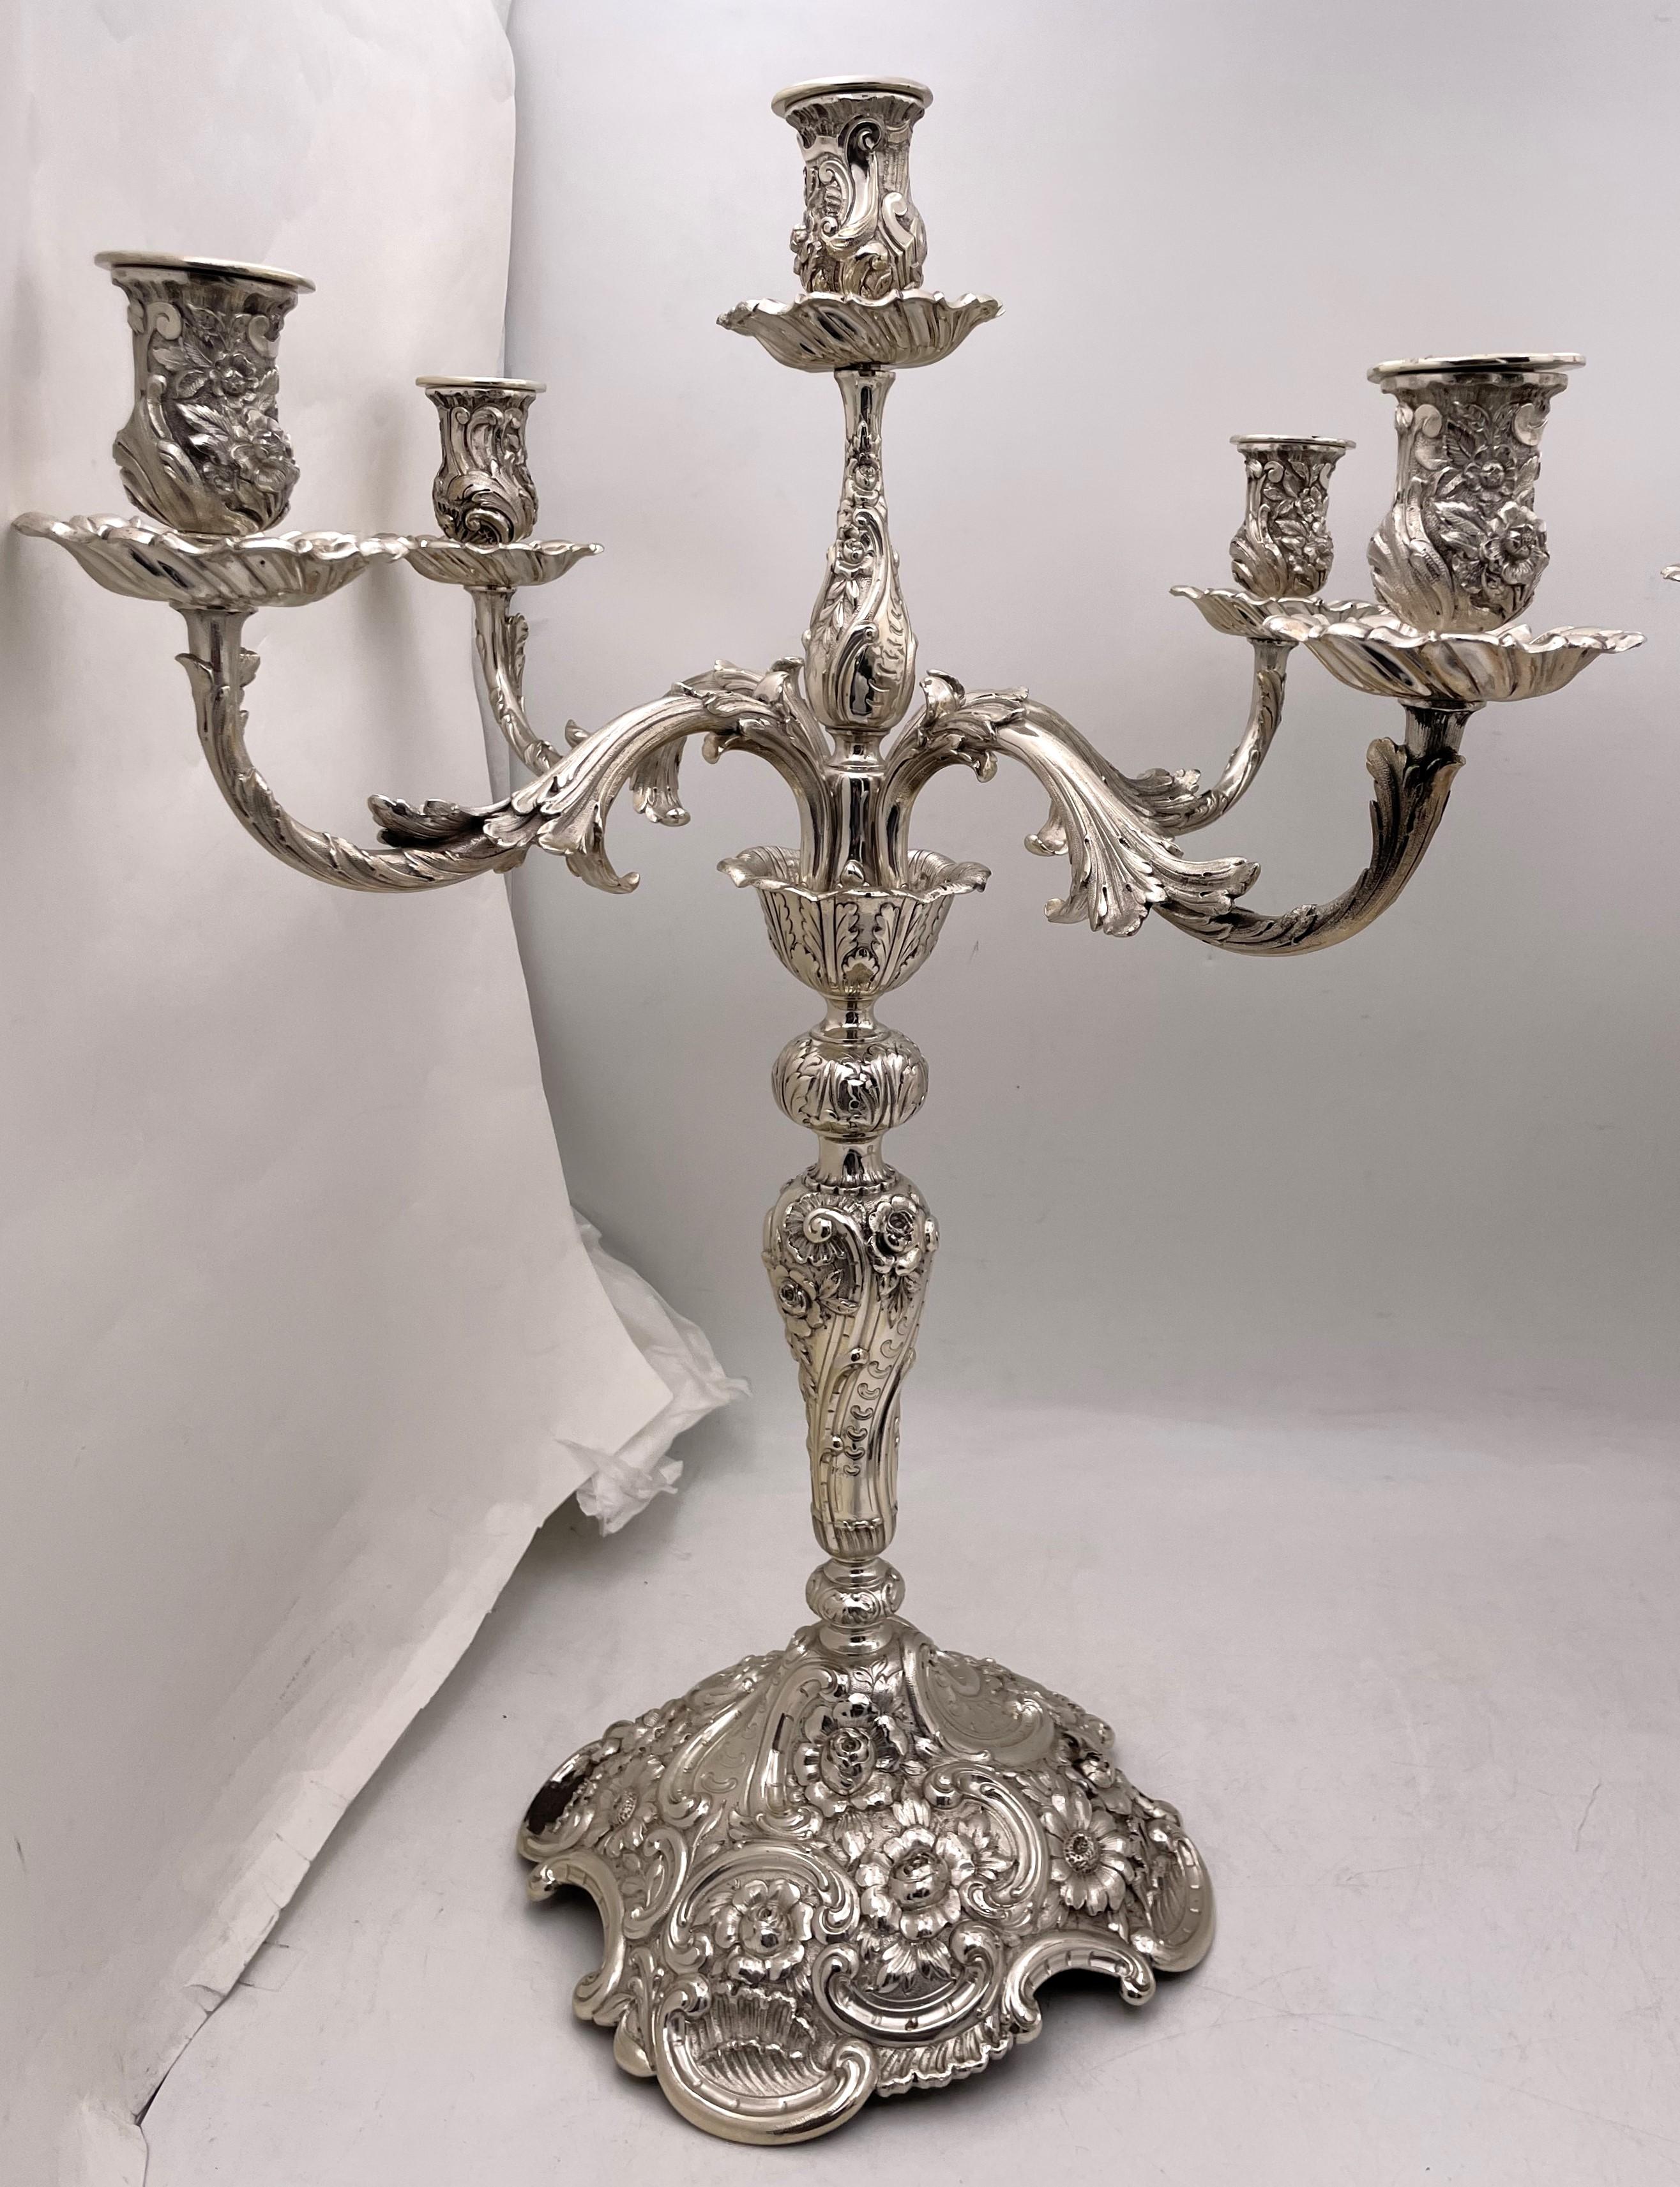 American Pair of Tiffany & Co. Sterling Silver 5-Light Monumental Repousse Candelabra For Sale